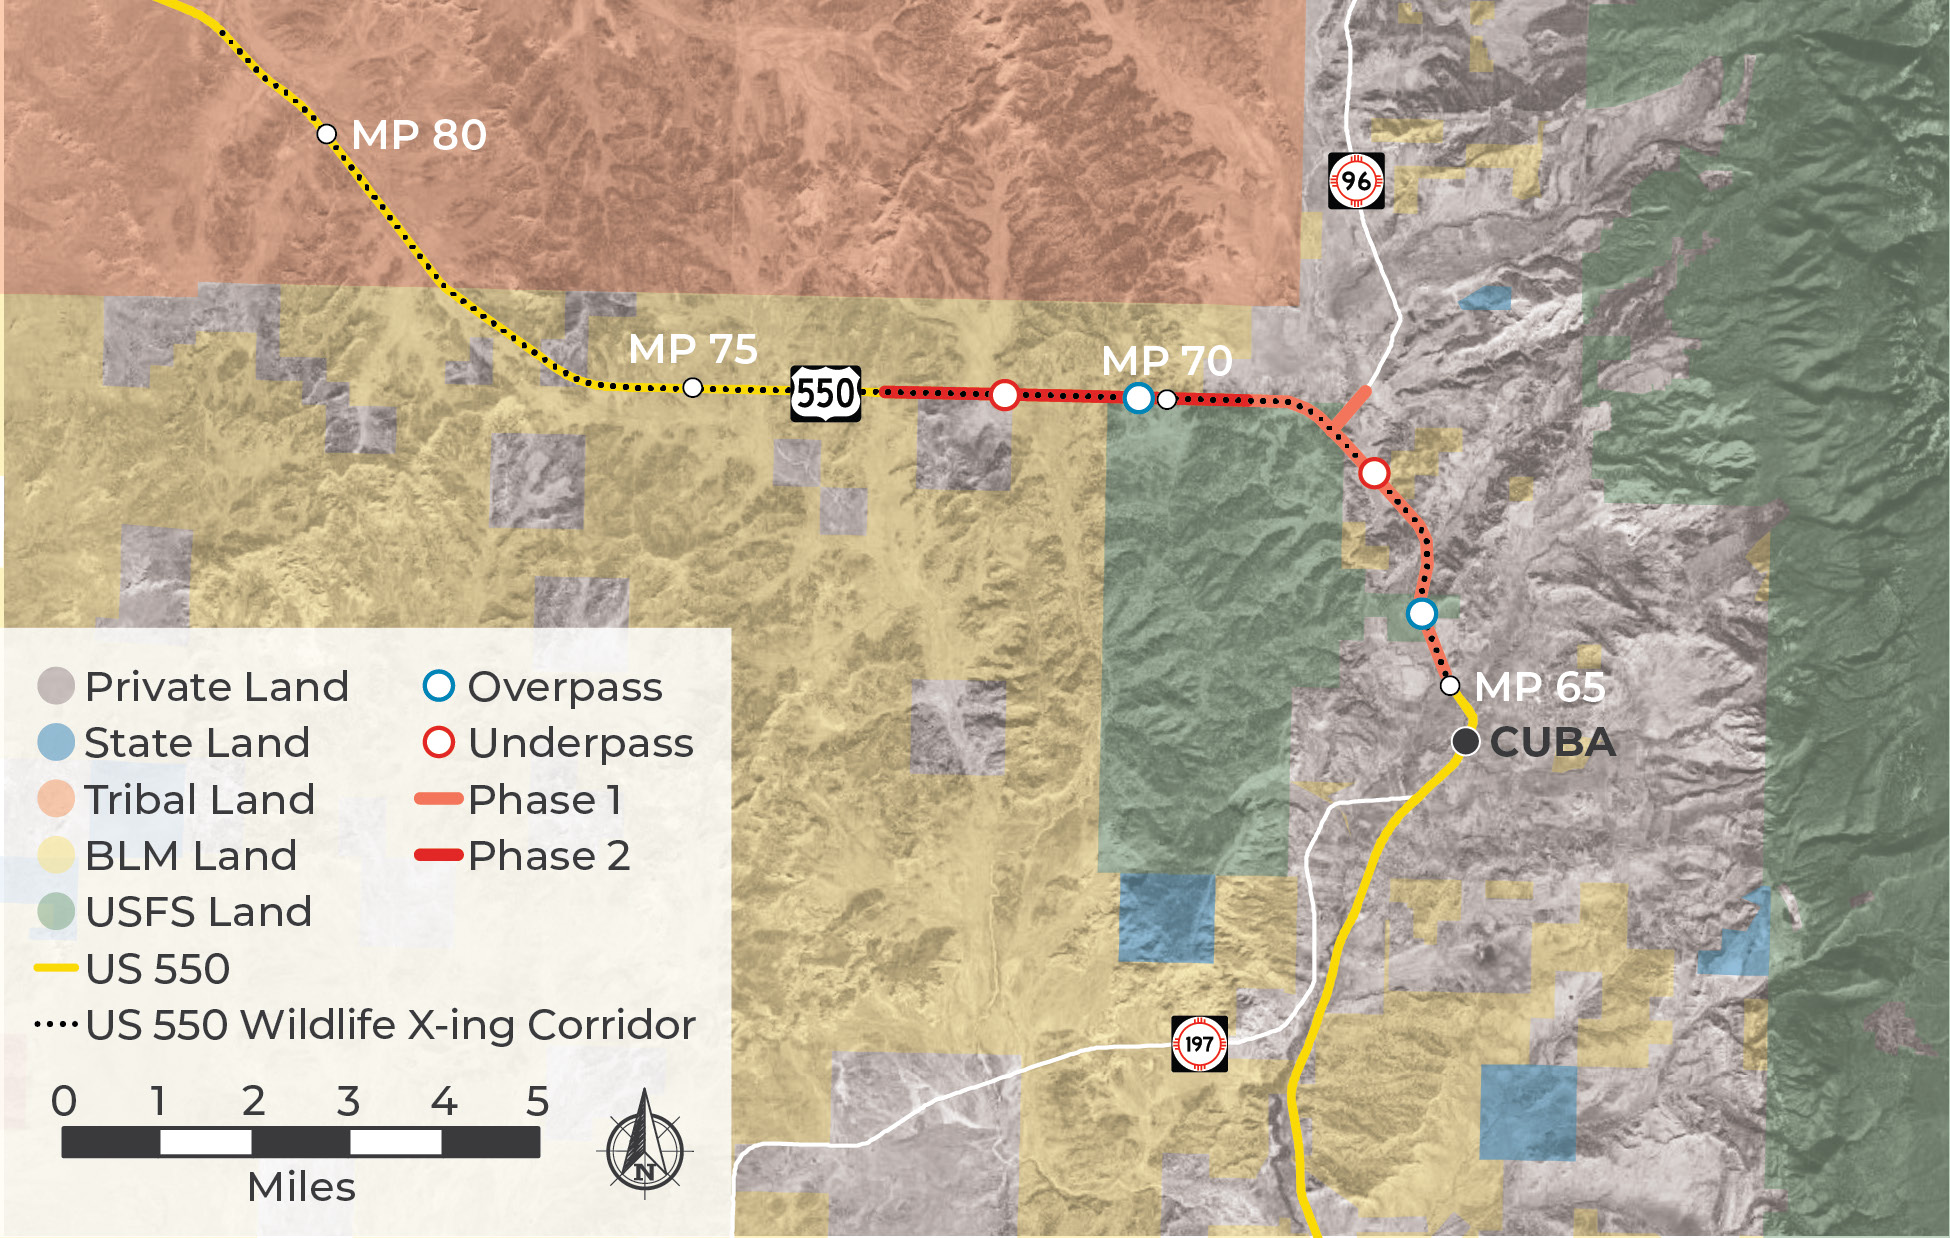 US 550 Project Area